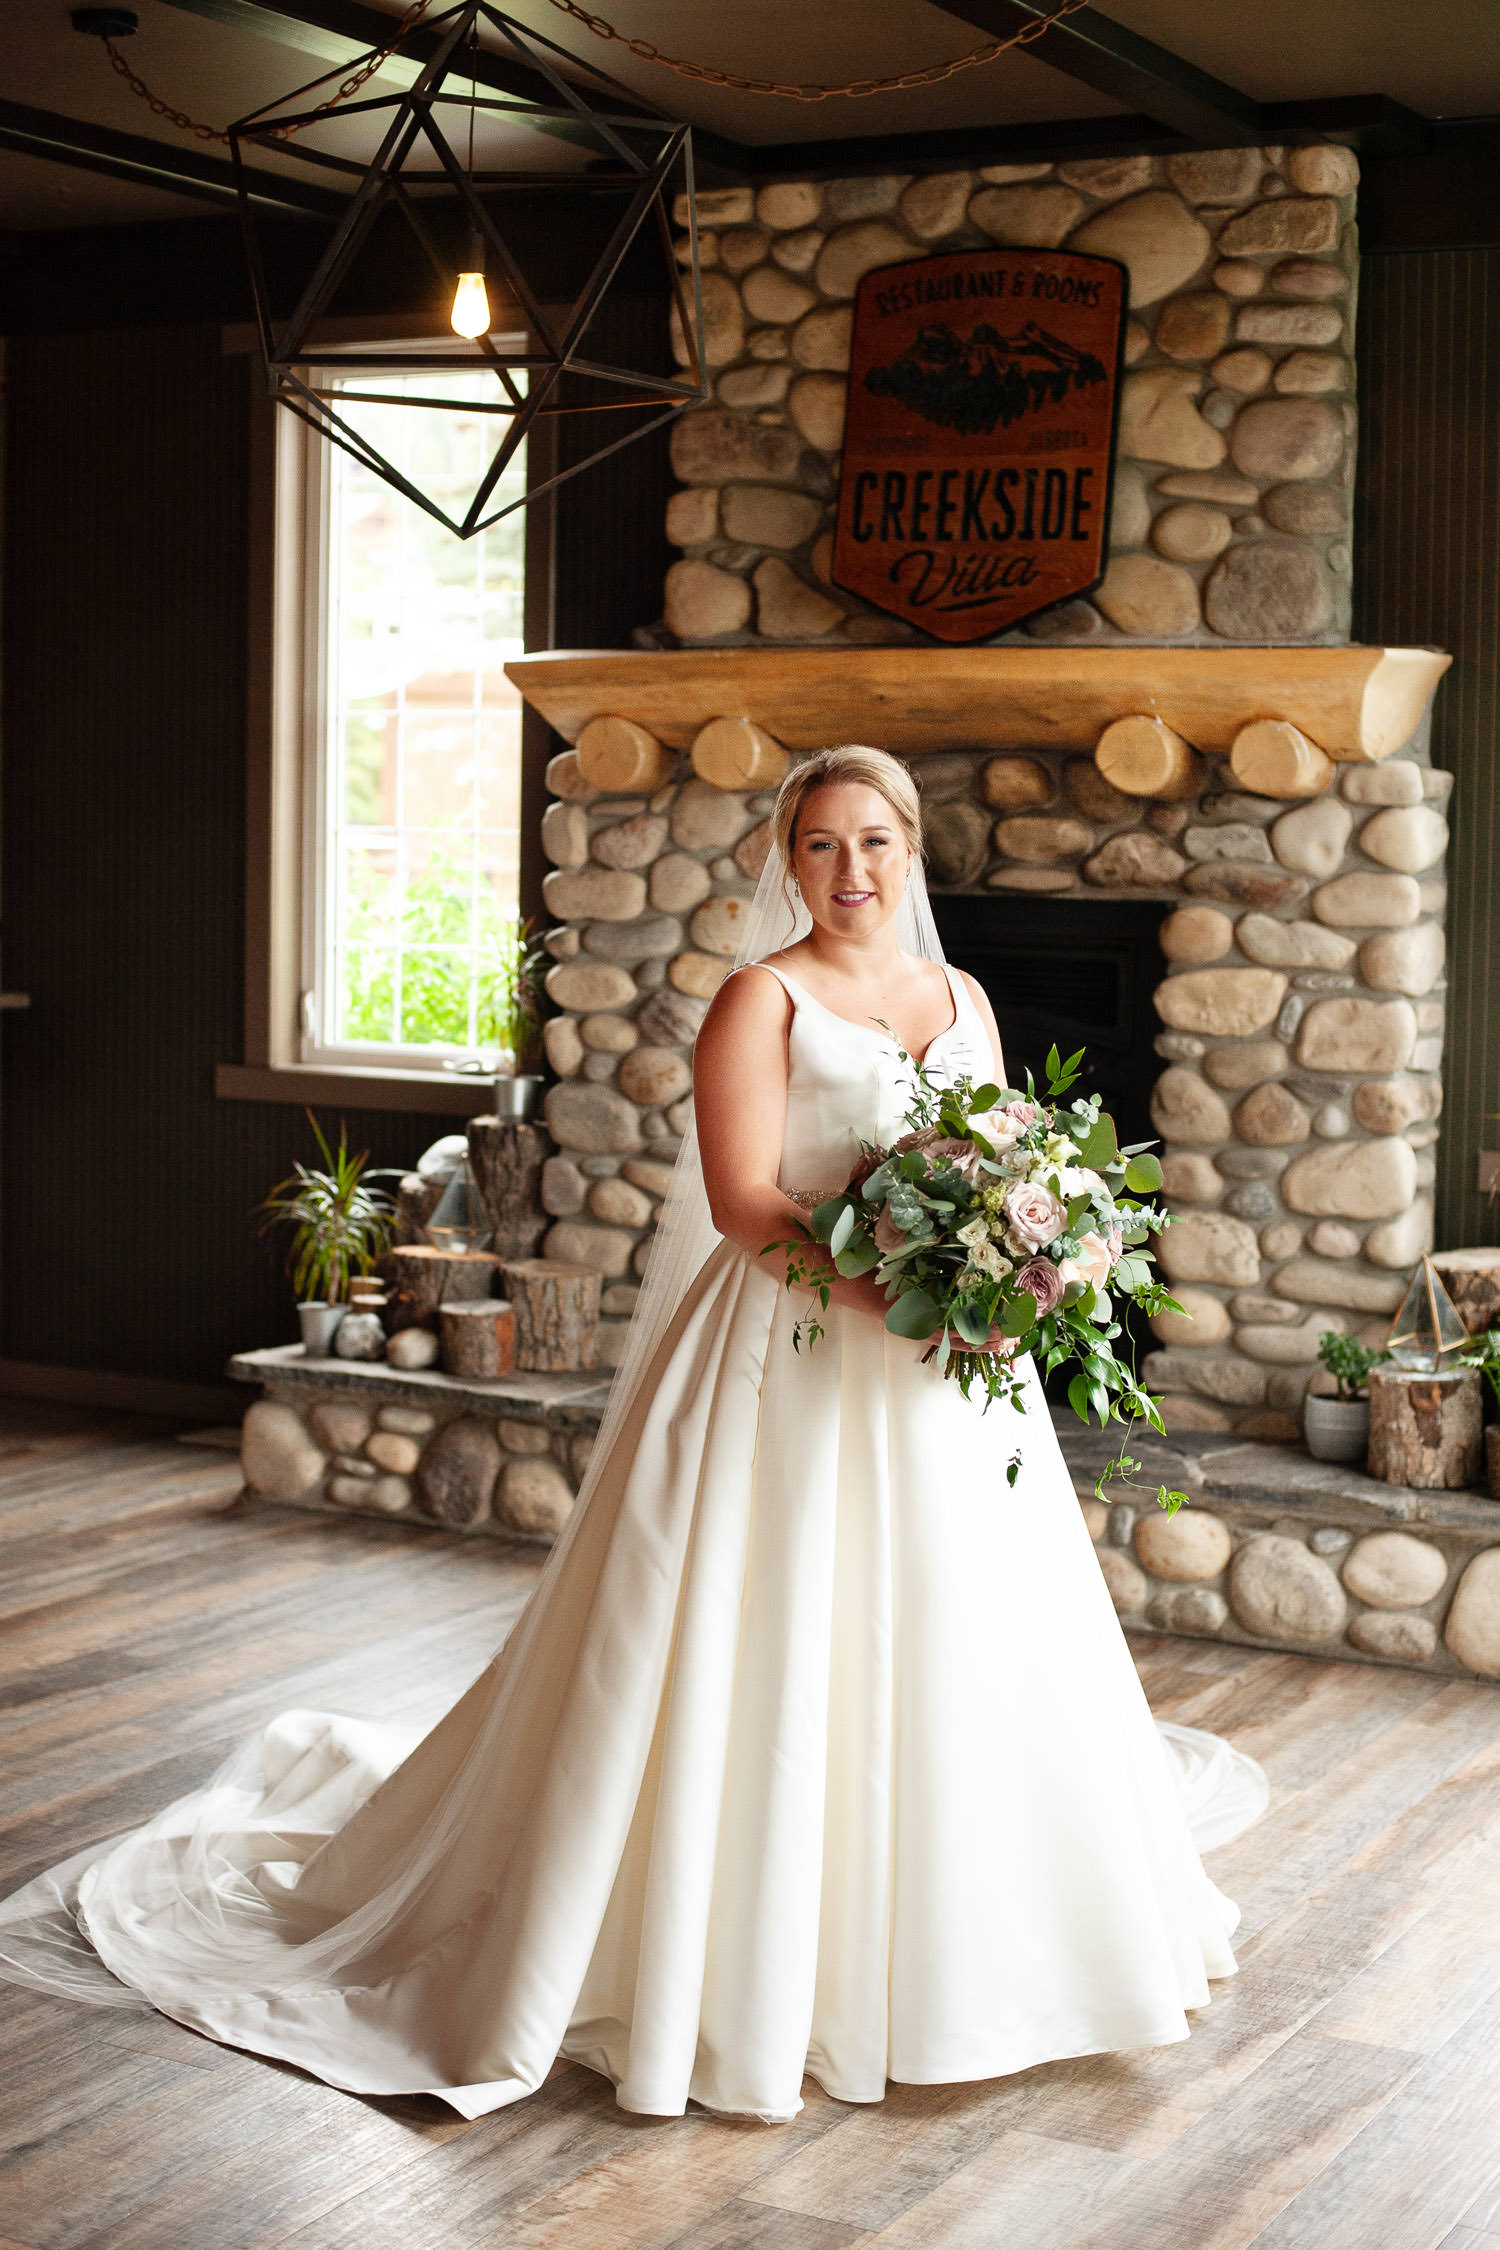 Bride poses at Creekside Villa in Canmore captured by Tara Whittaker Photography